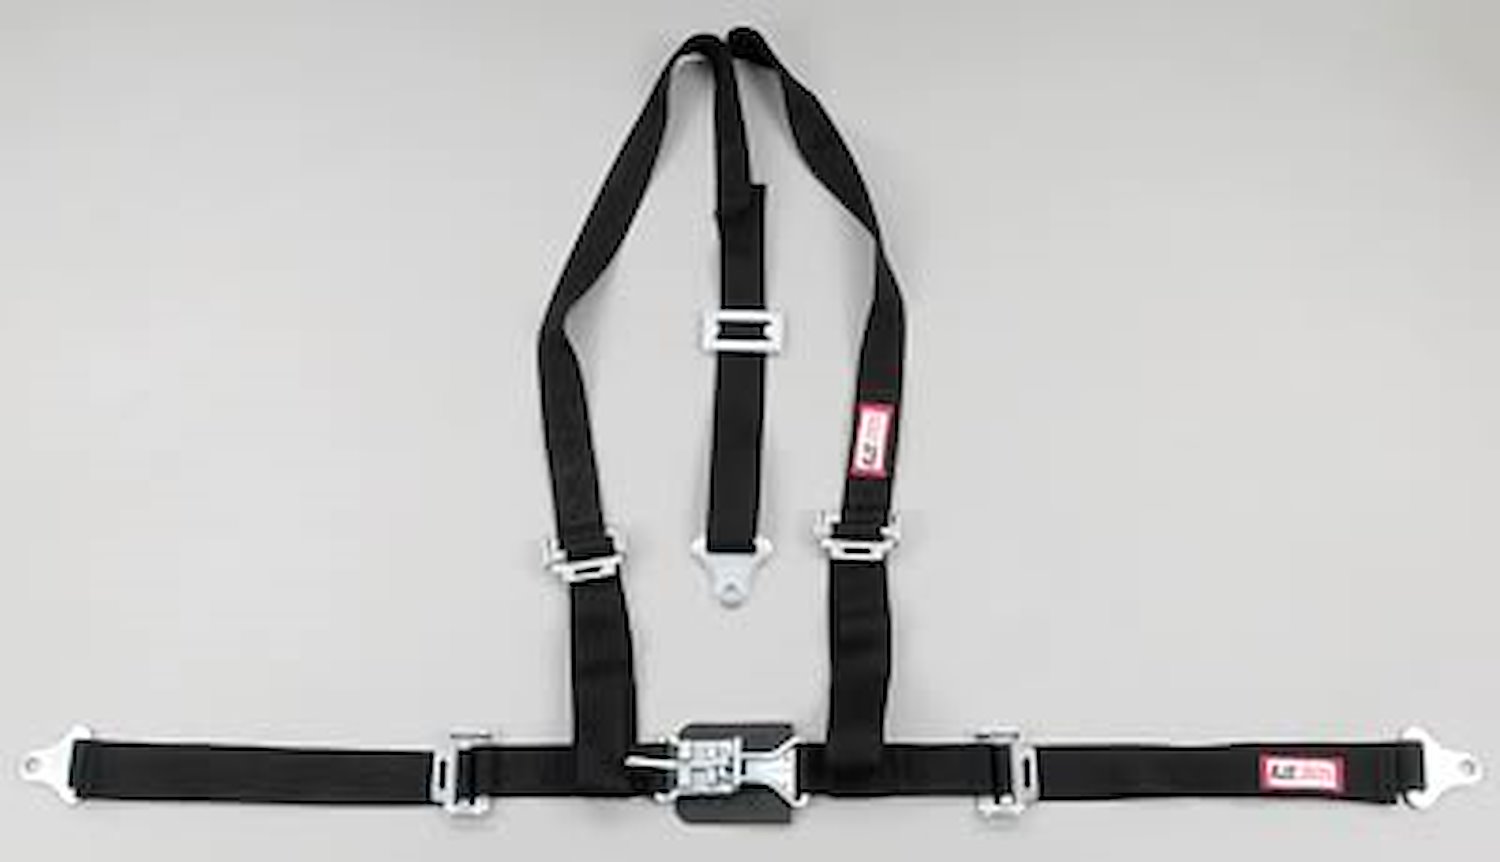 NON-SFI L&L HARNESS 2 PULL UP Lap Belt SEWN IN 2 S.H. Y FLOOR Mount ALL WRAP ENDS BLACK